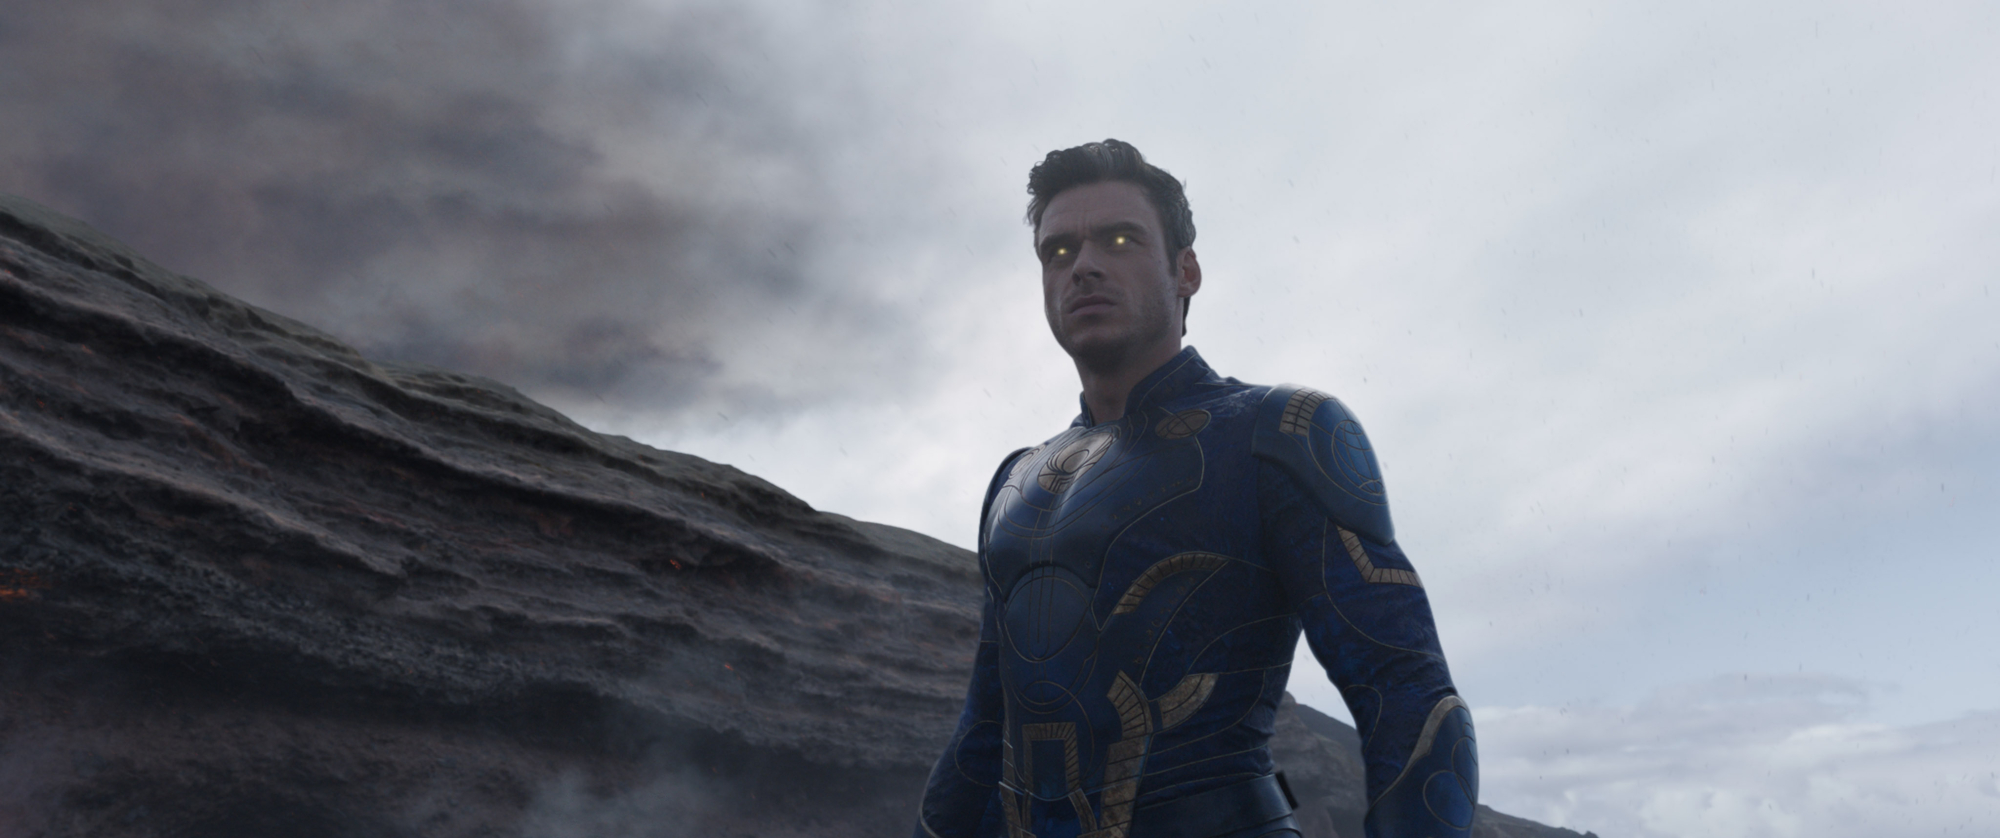 'Eternals' Ikaris (Richard Madden) with costume and glowing eyes